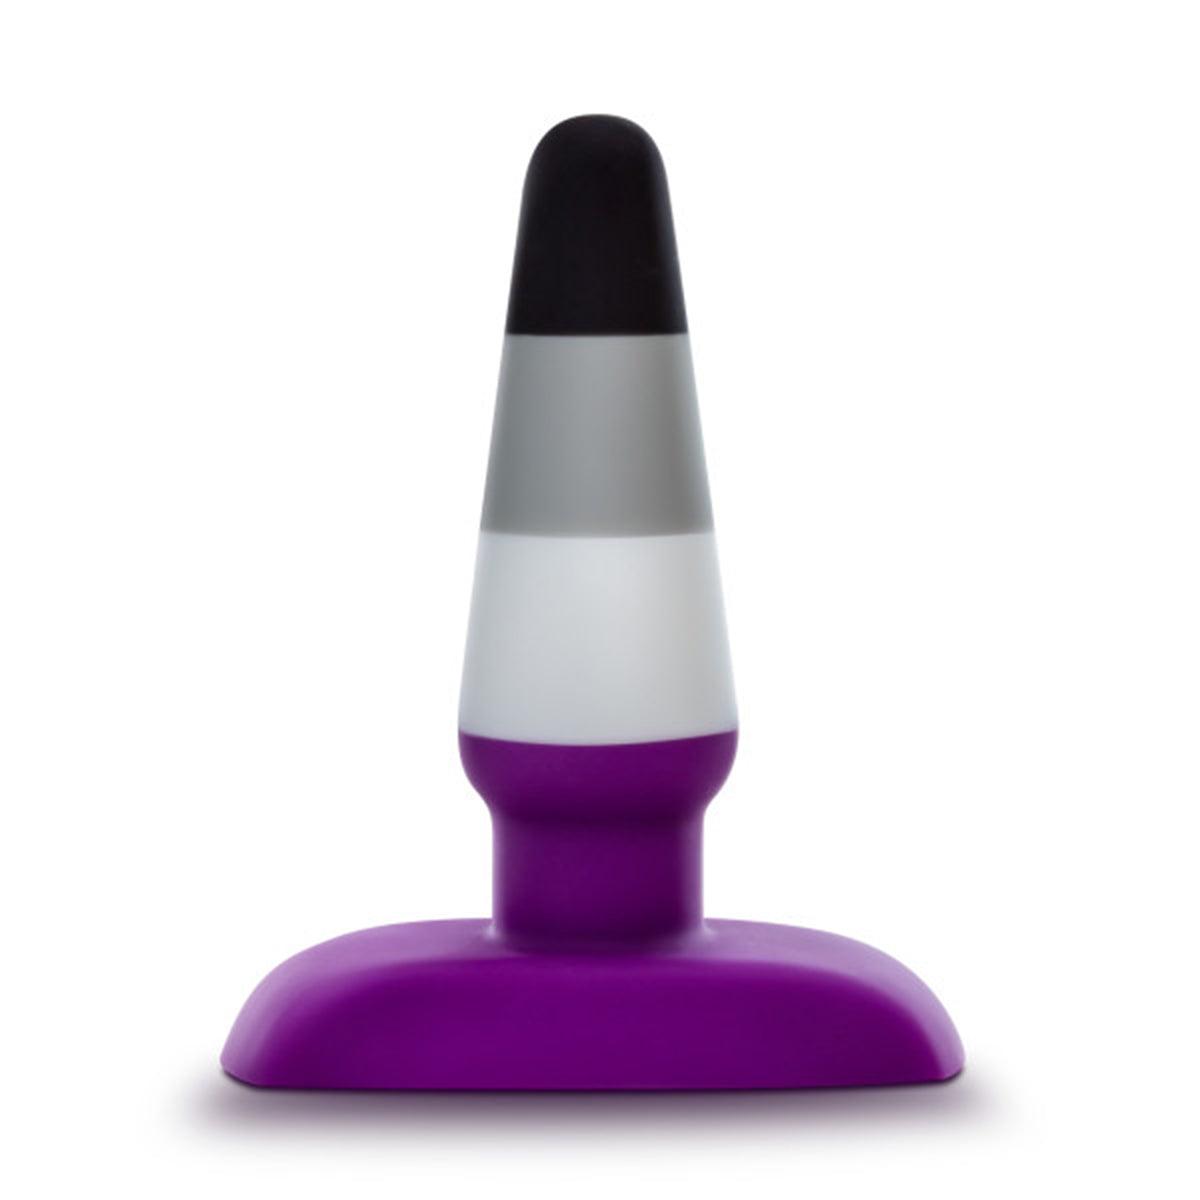 Avant Pride P7 - Ace Asexual Plug - Buy At Luxury Toy X - Free 3-Day Shipping